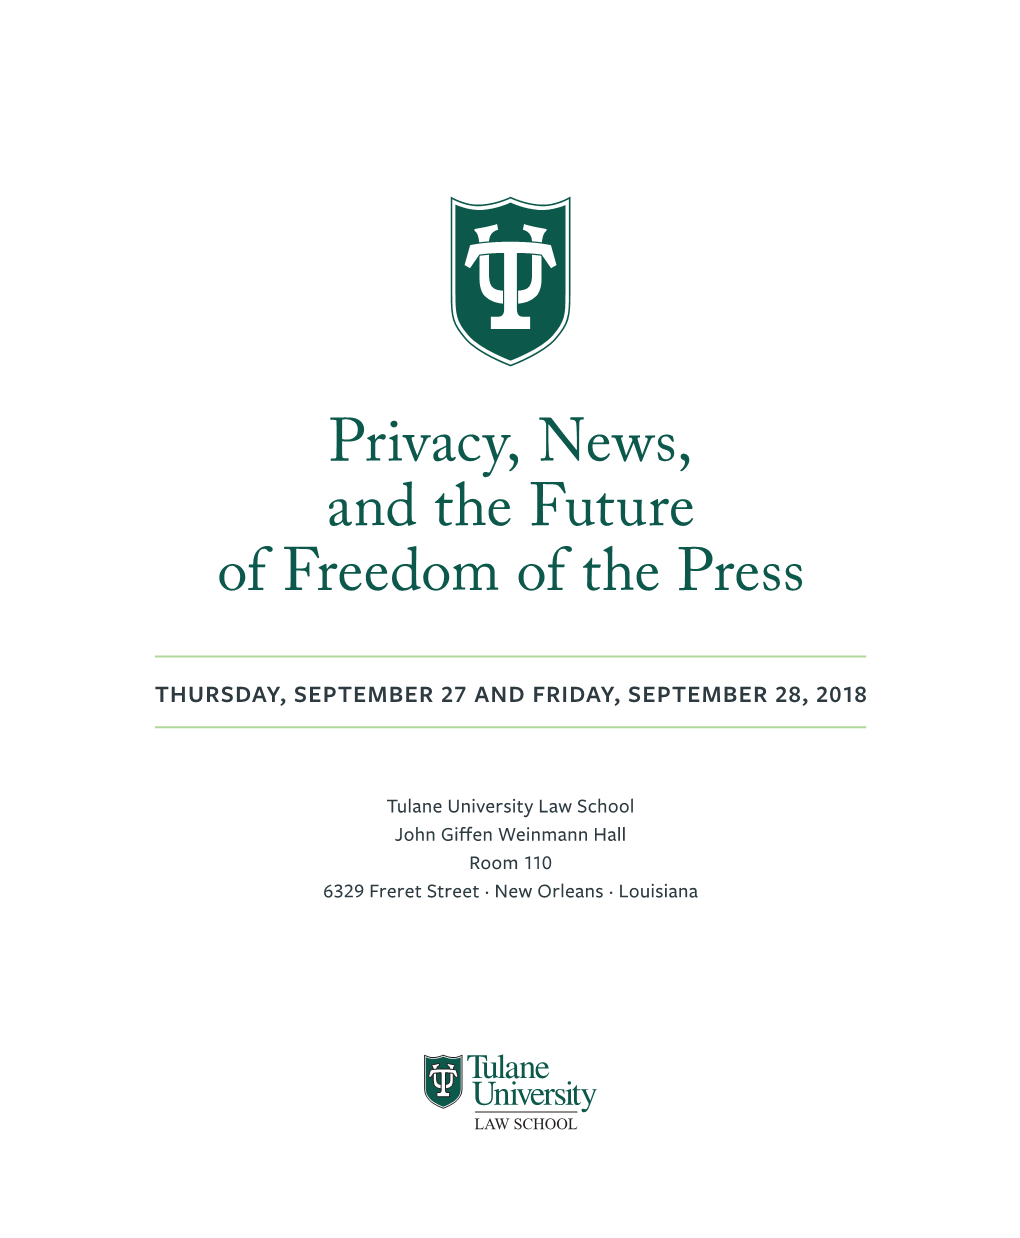 Privacy, News, and the Future of Freedom of the Press